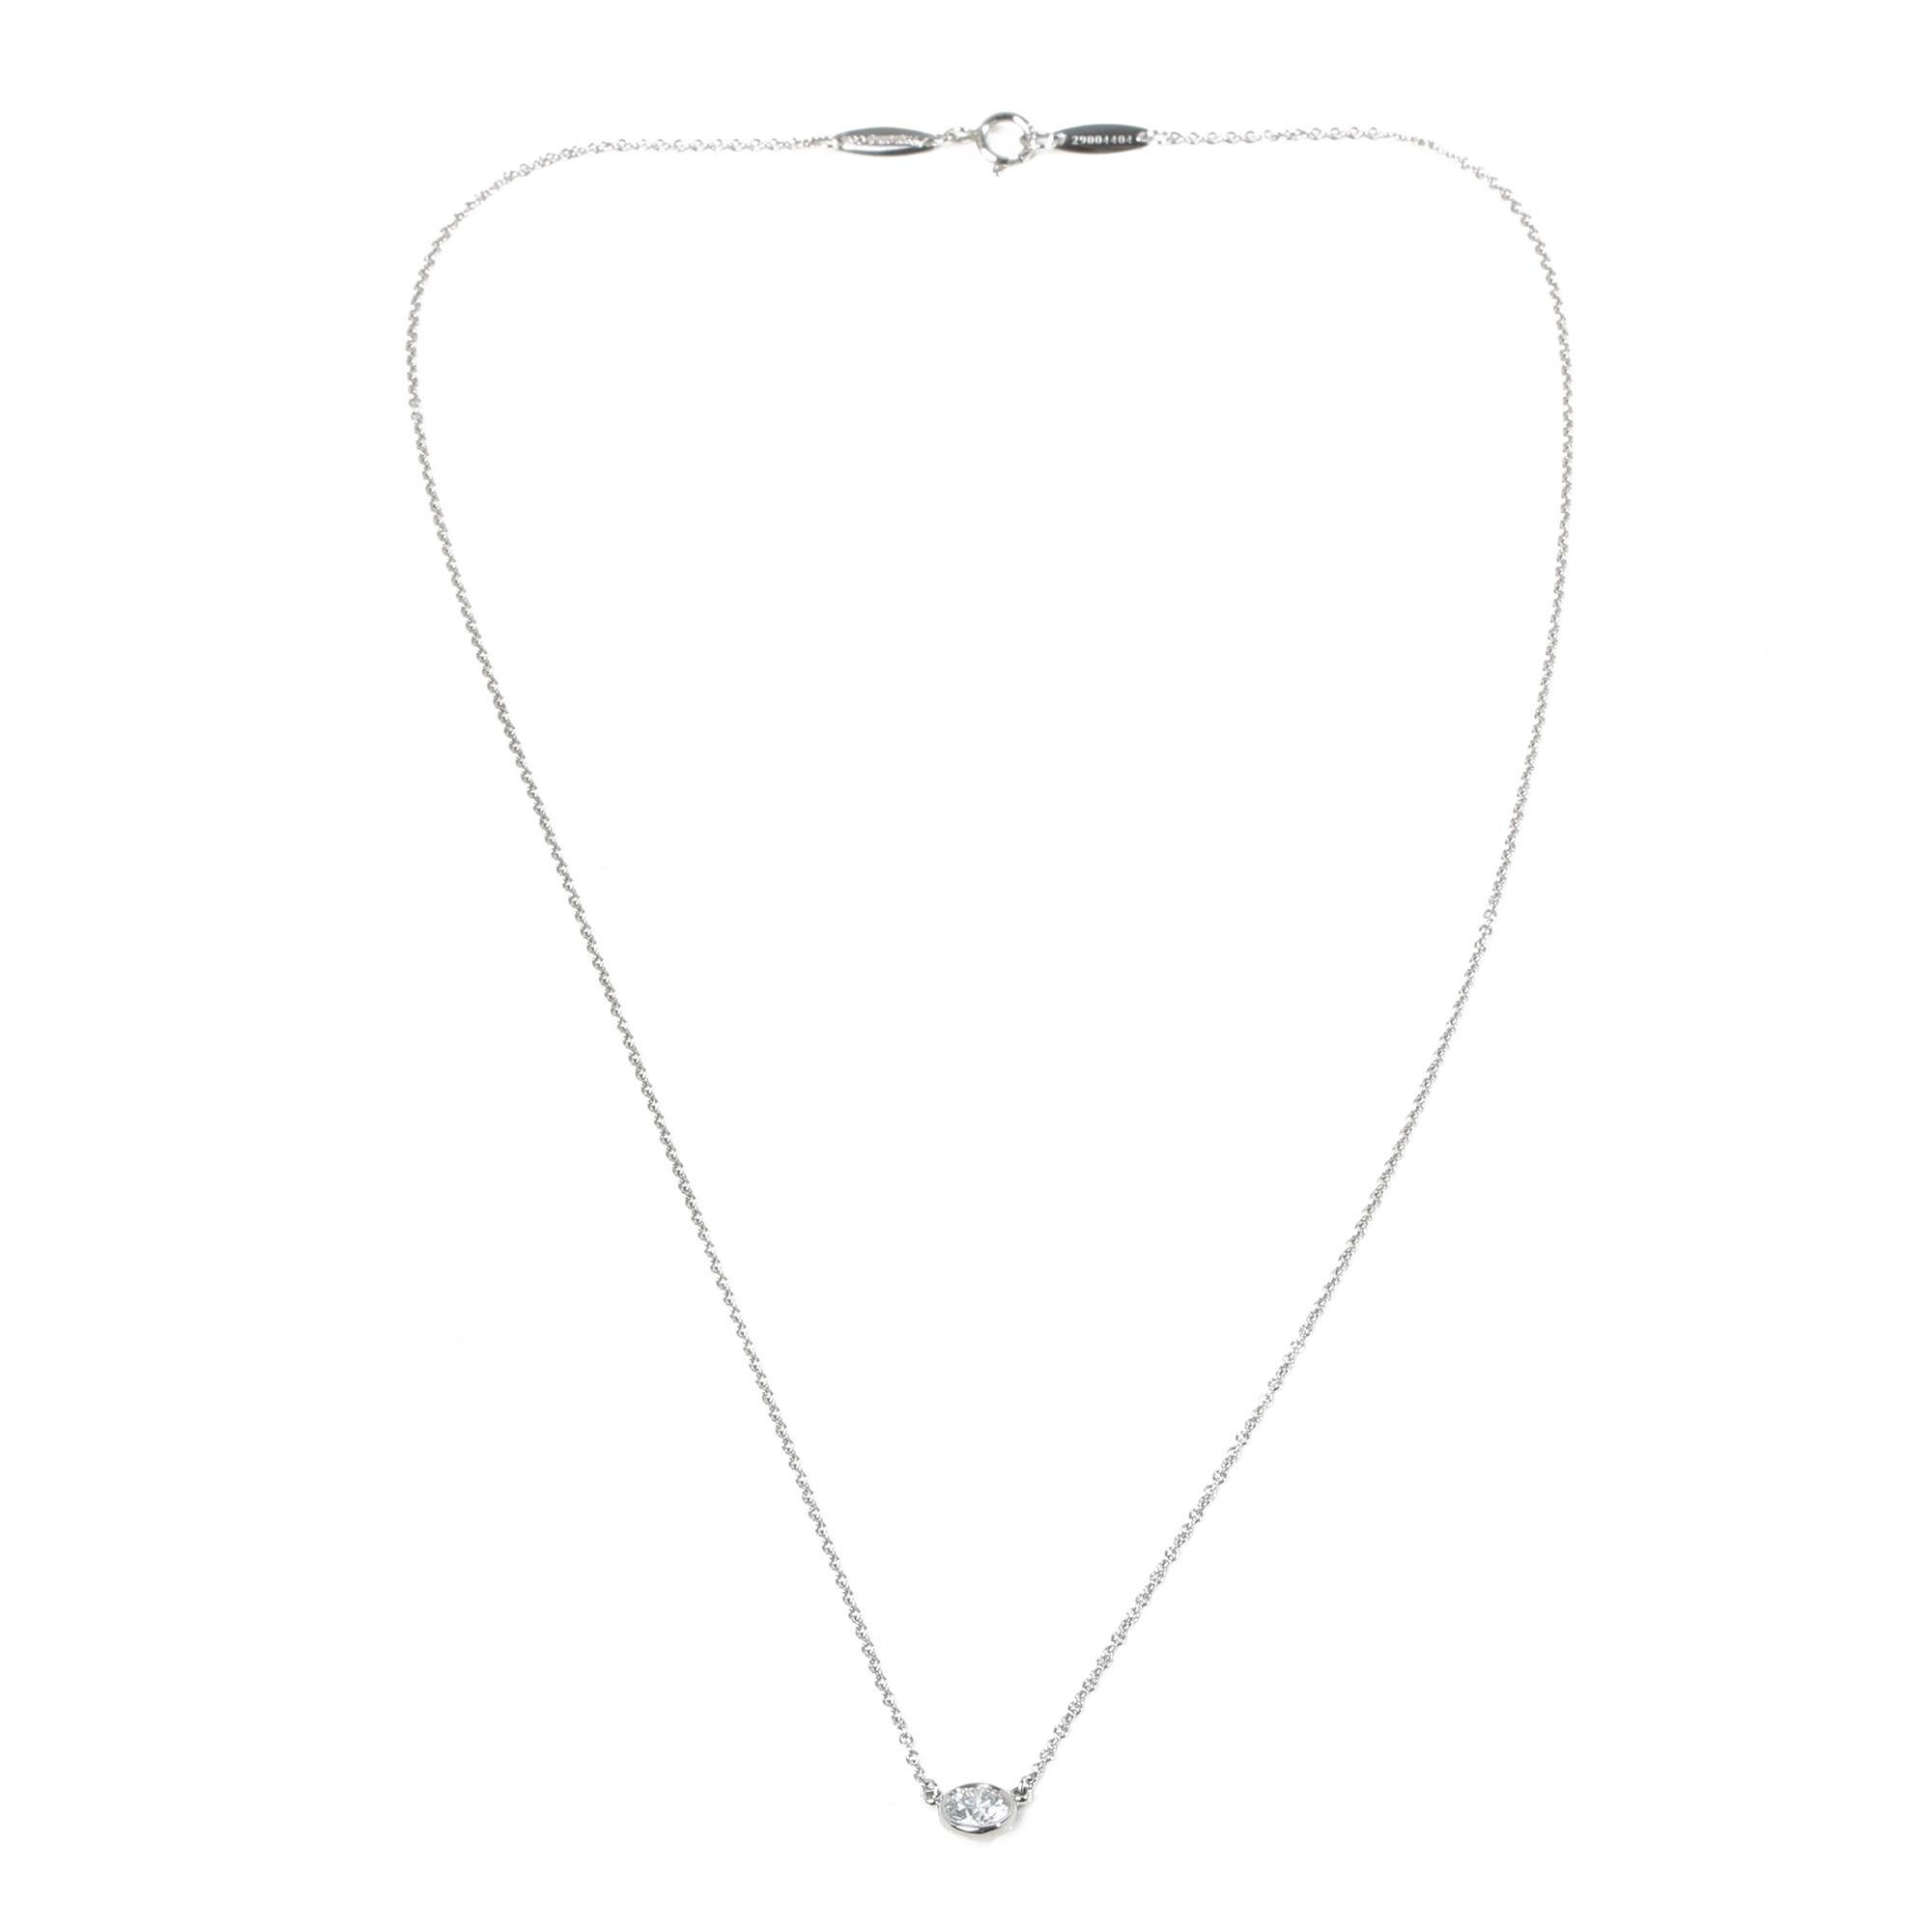 This necklace by Tiffany & Co is from their Elsa Perreti, Diamonds by the Yard collection and features a round cut diamond of 0.35 carats, made in platinum. Complete with a Xupes presentation box. Our Xupes reference is COMJ504 should you need to